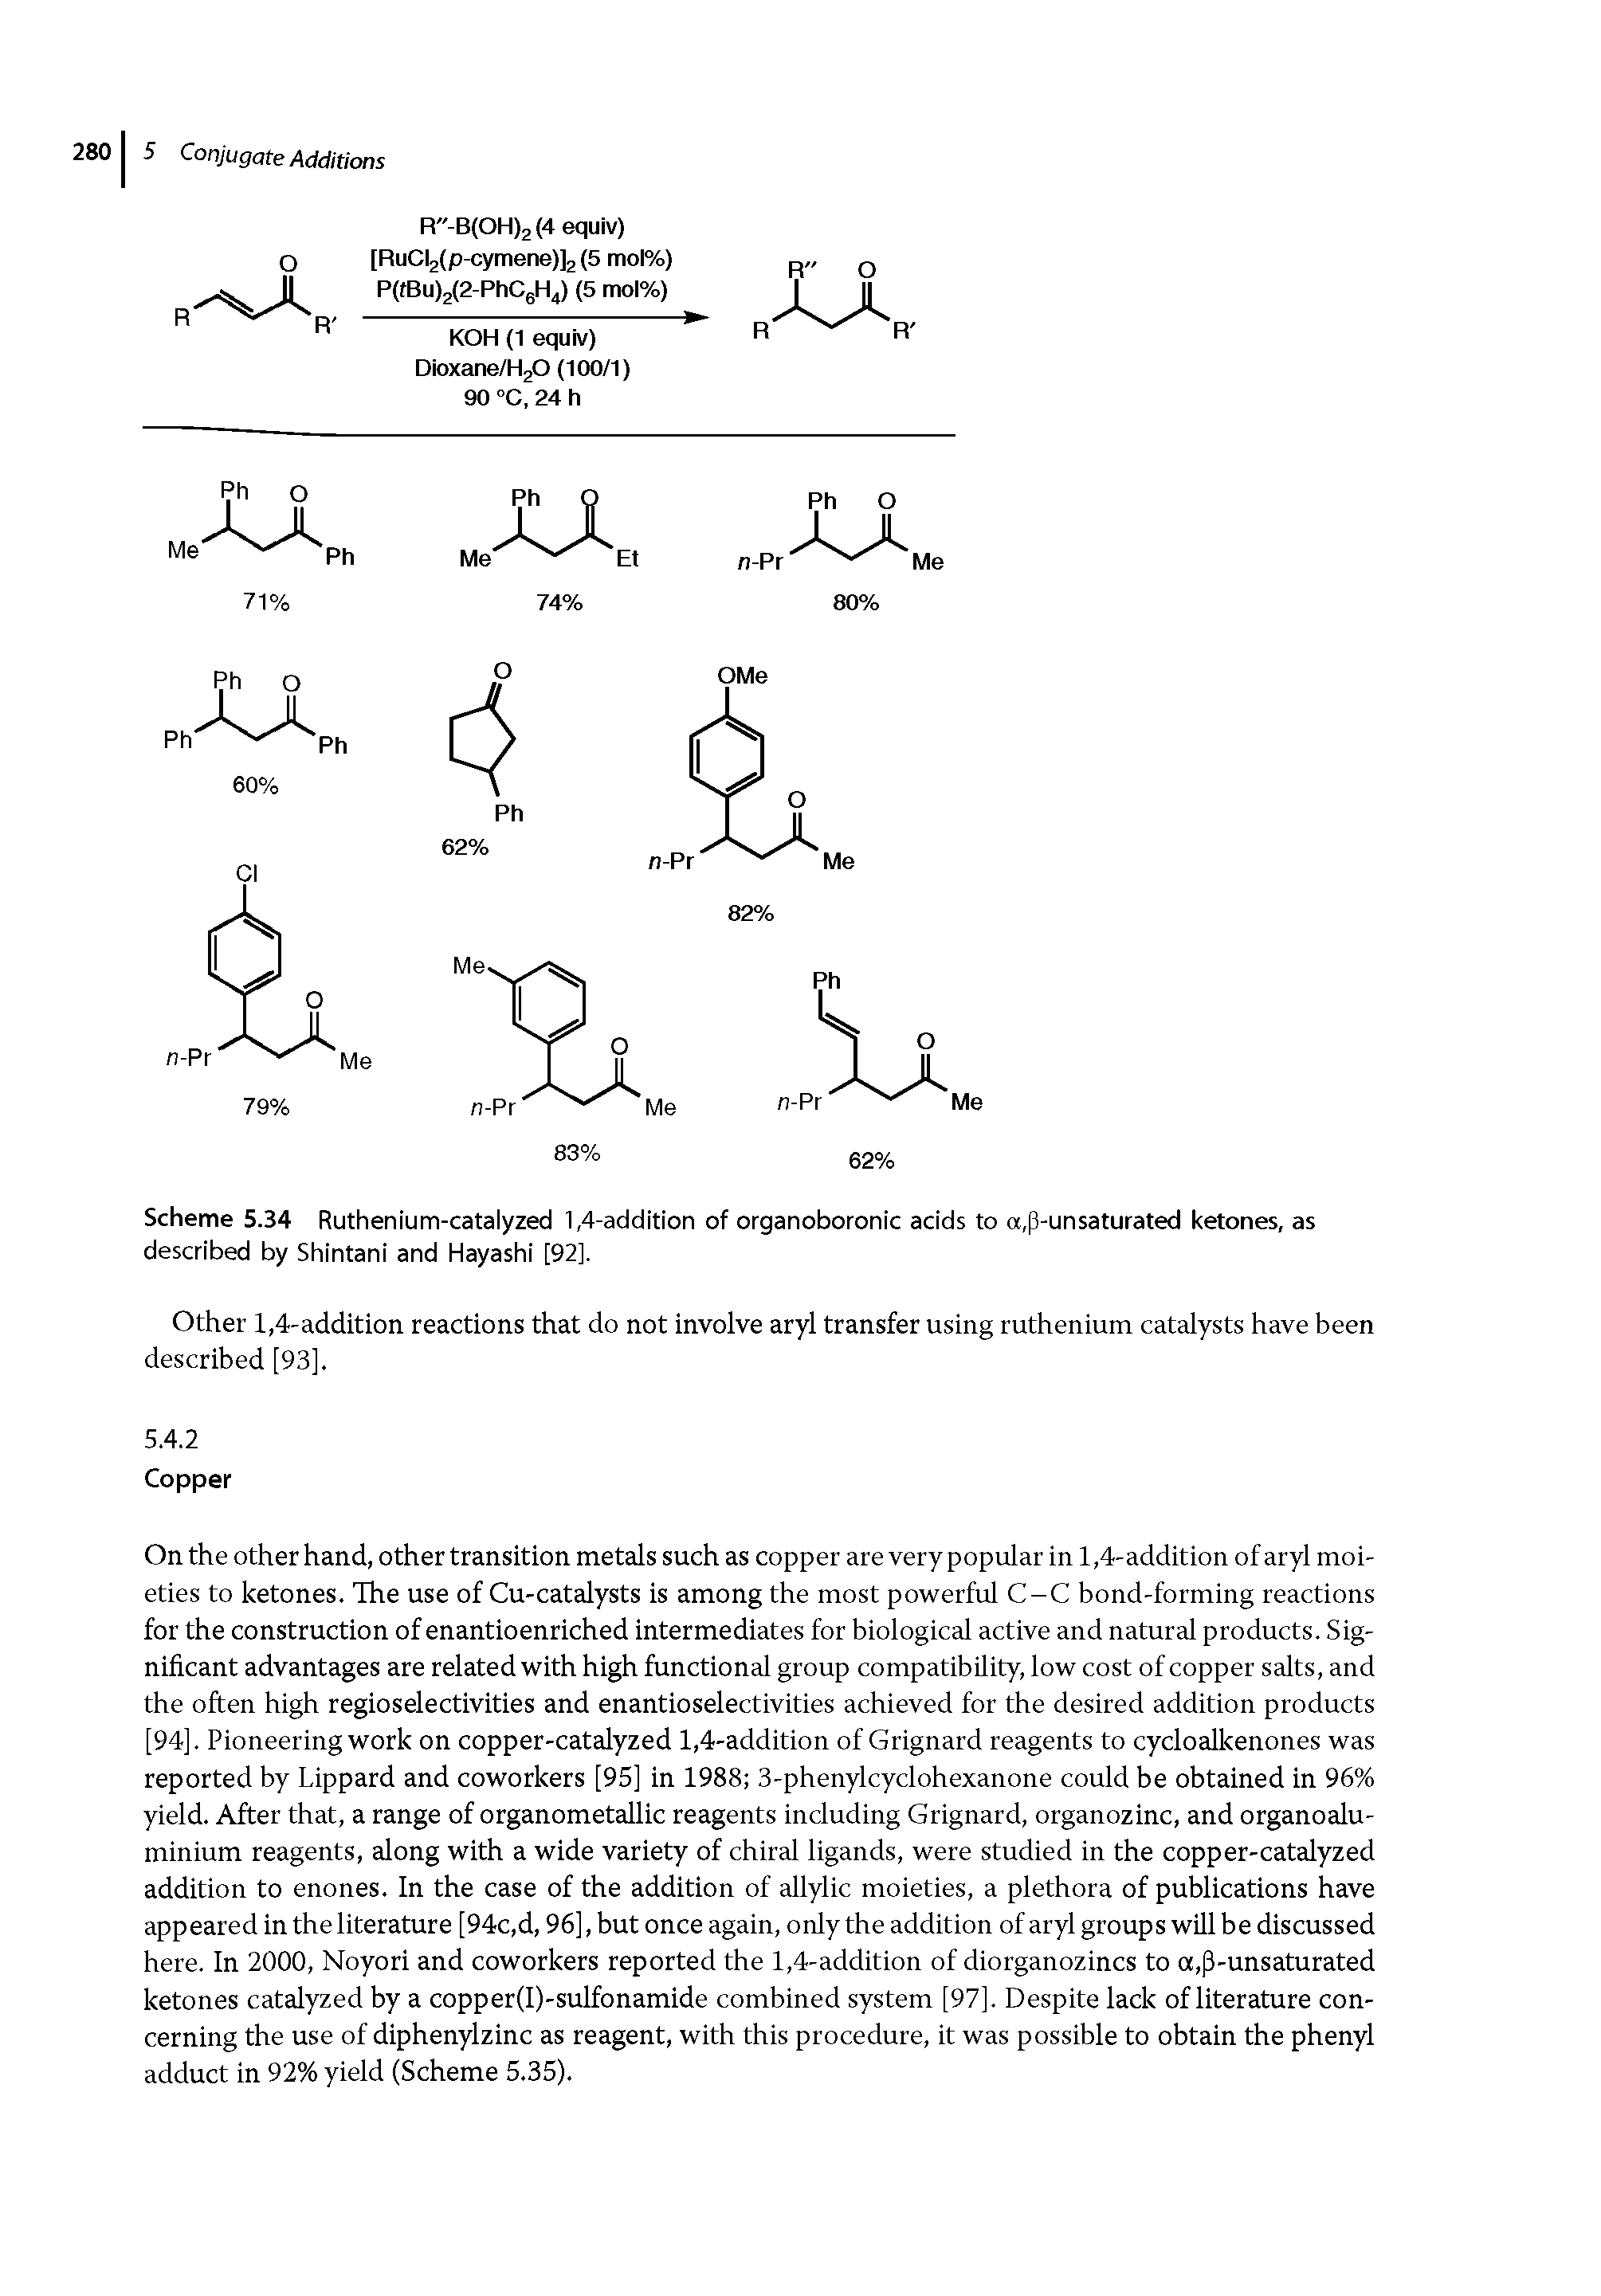 Scheme 5.34 Ruthenium-catalyzed 1,4-addition of organoboronic adds to a,p-unsaturated ketones, as described by Shintani and Hayashi [92].